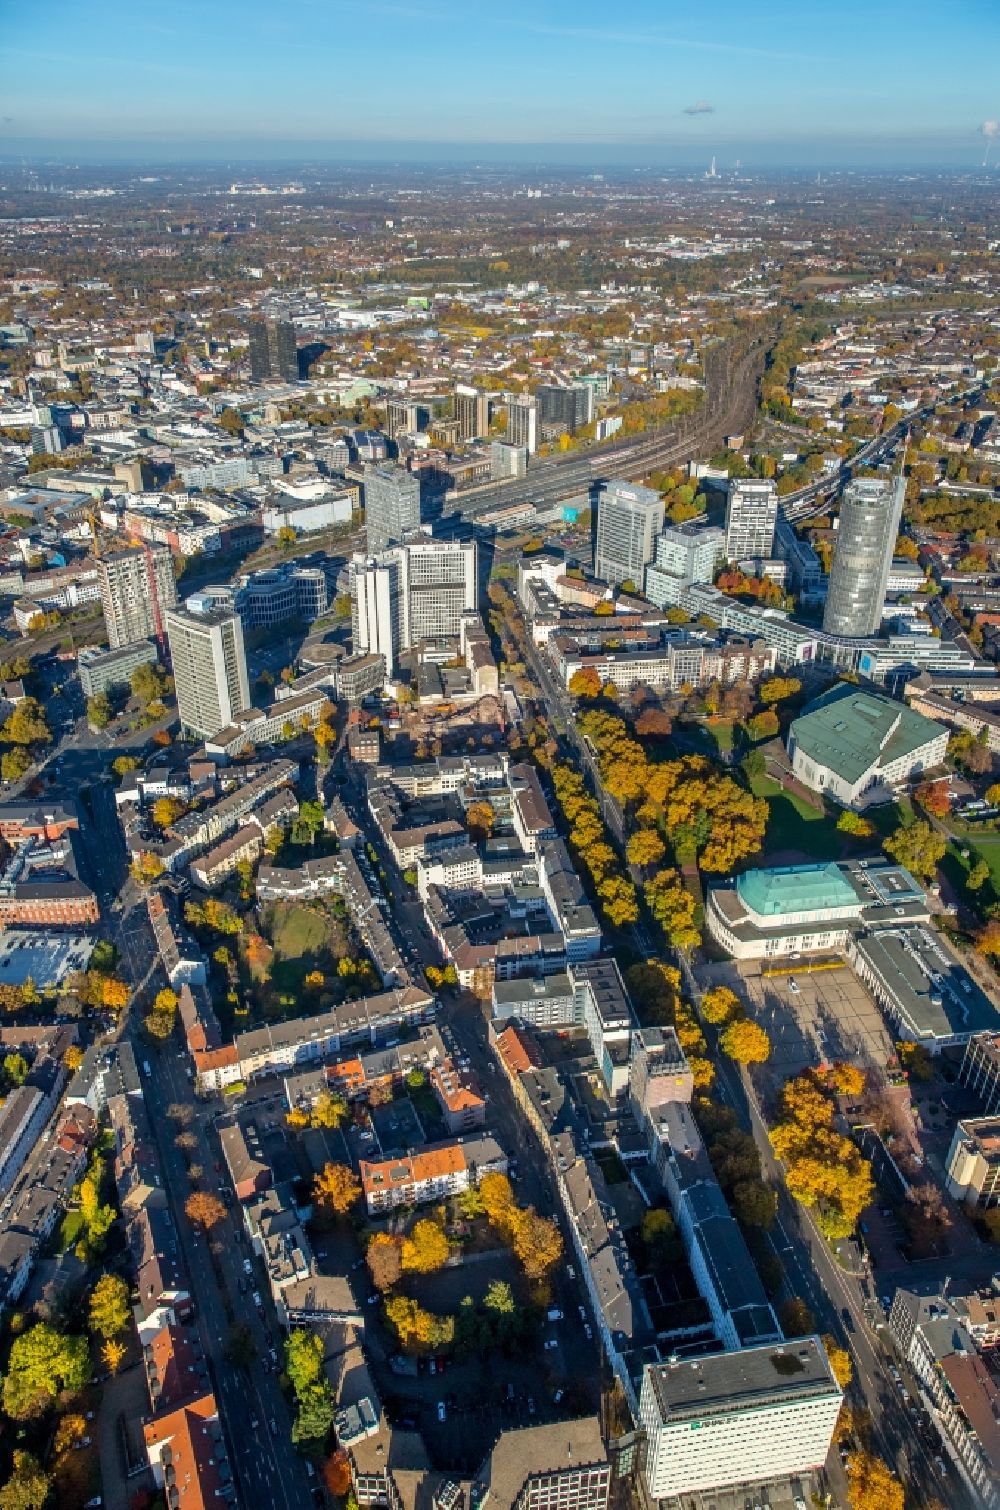 Aerial photograph Essen - City view of downtown area along the Huyssenallee in Essen in the state North Rhine-Westphalia. In the picture the philharmonic hall Essen, the RWE Tower and the Aalto theater